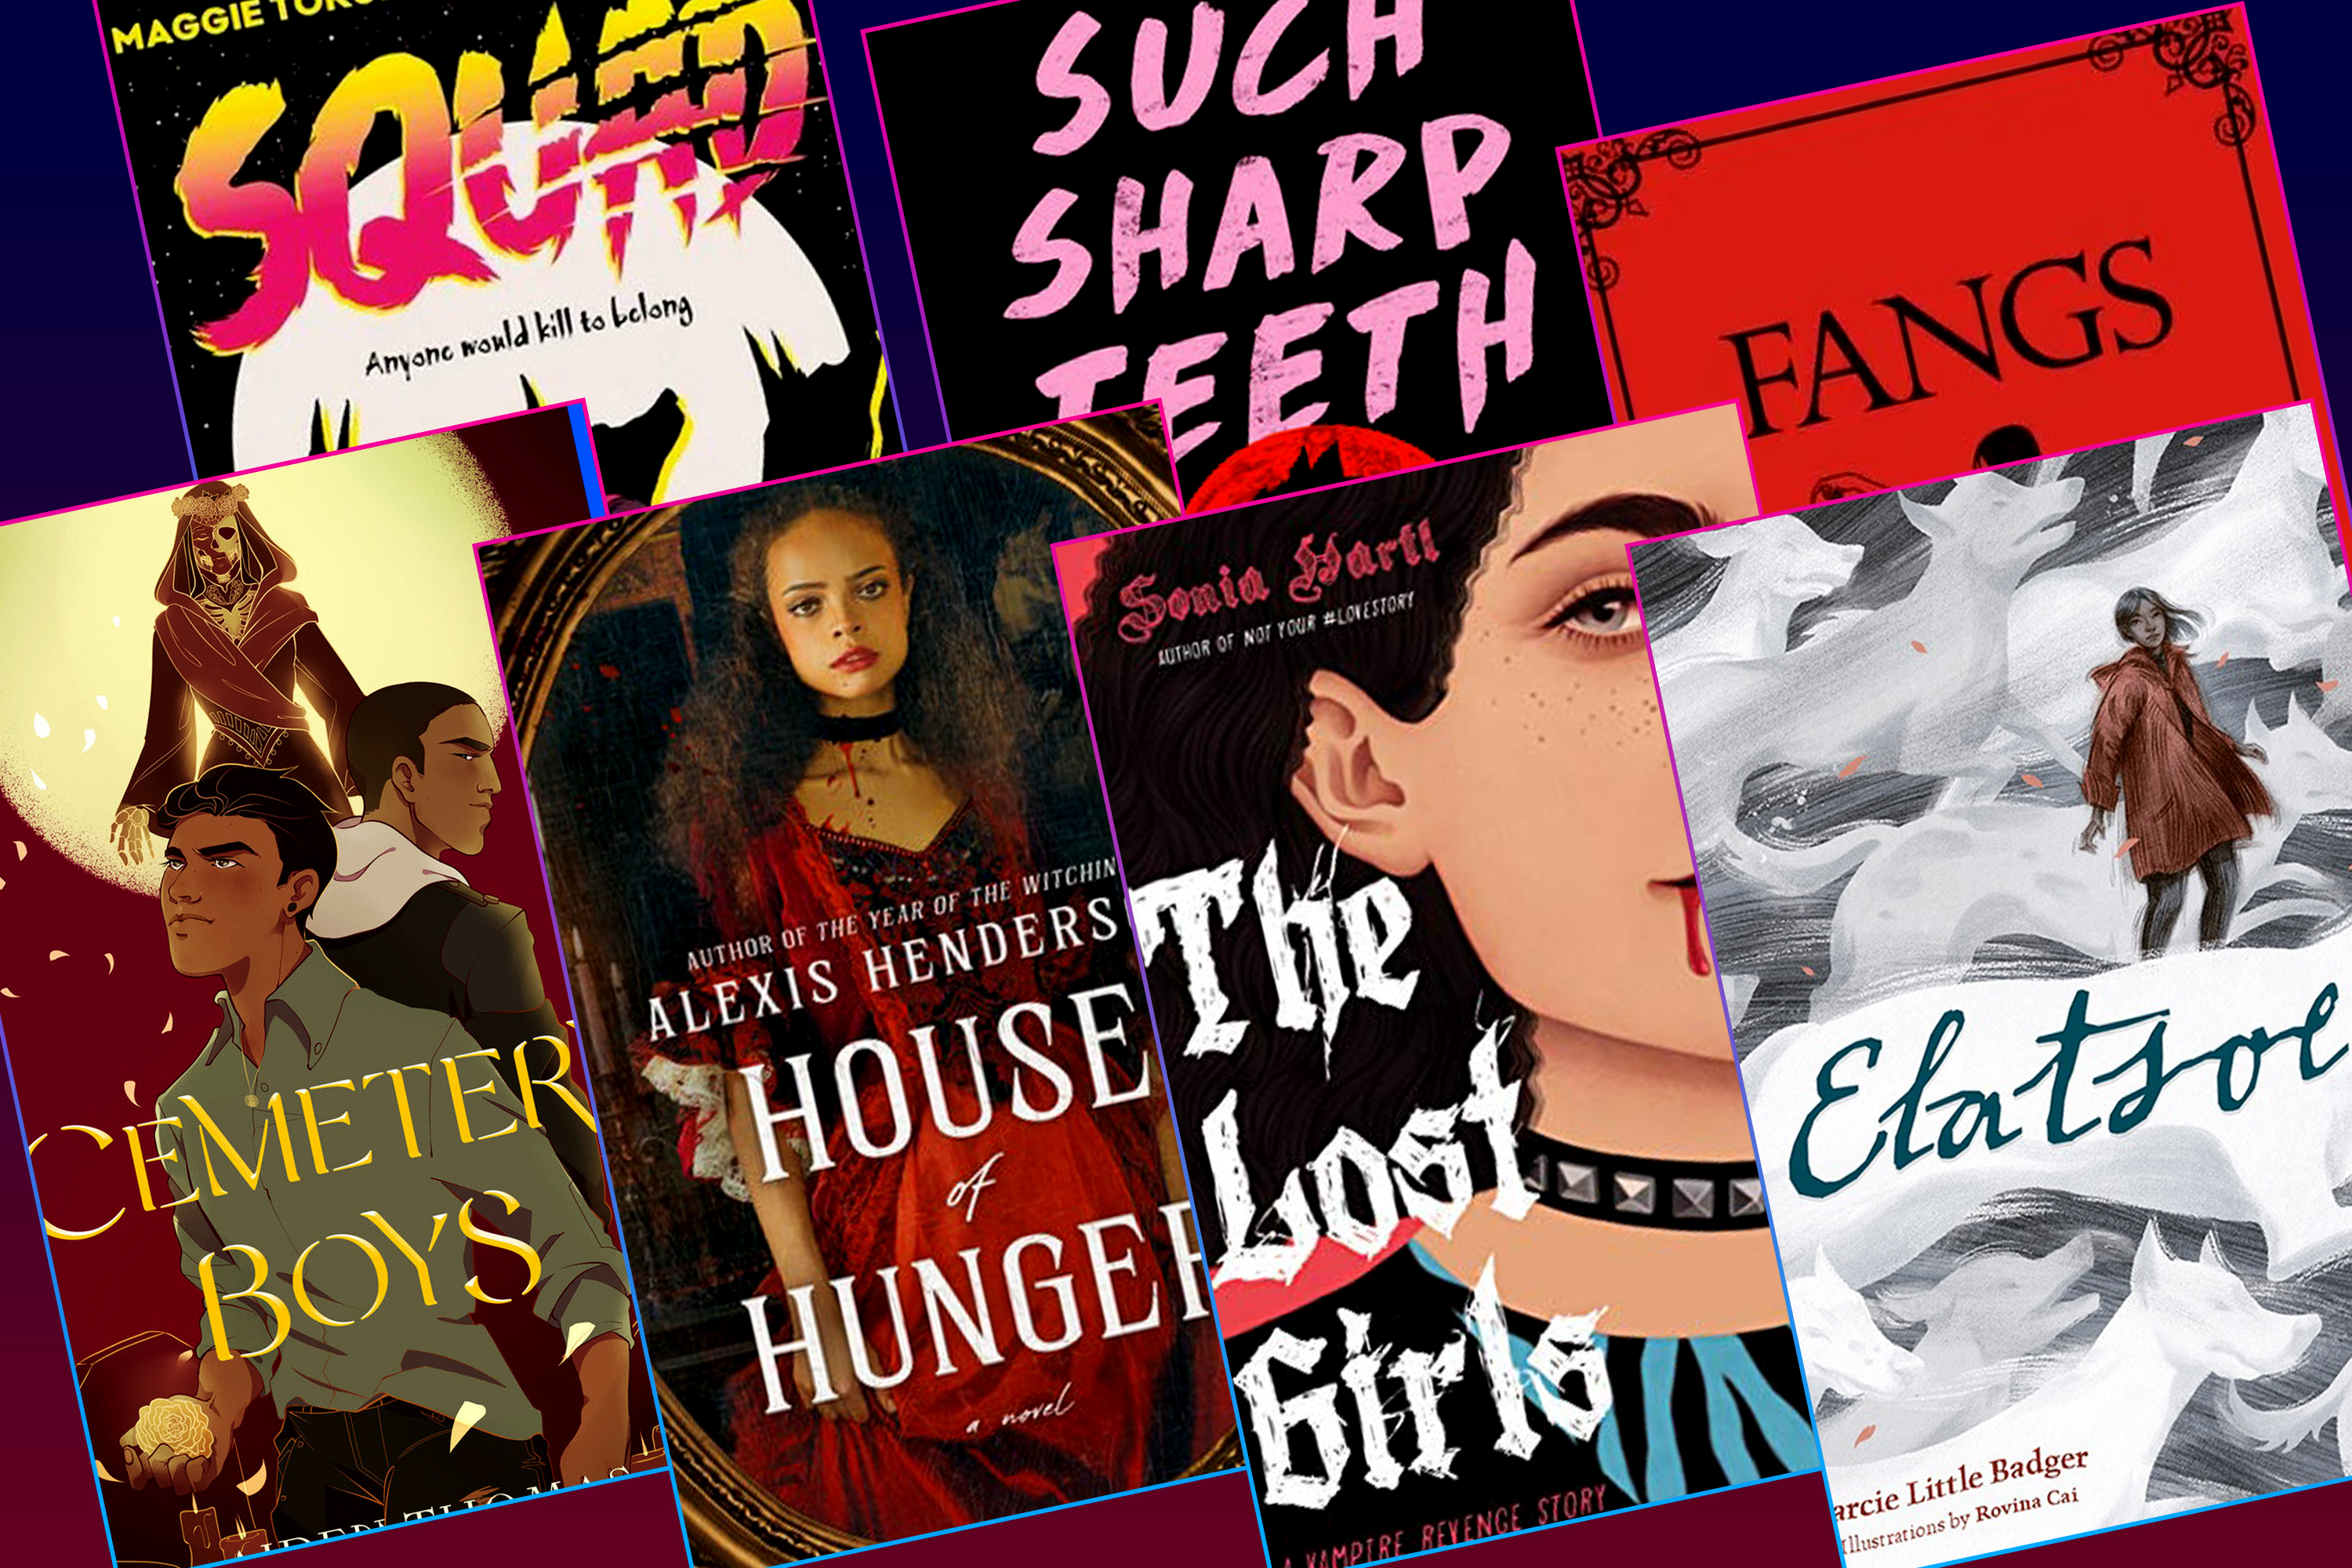 Collage image of book covers featured in this story. The covers featured are: Squad, Such Sharp Teeth, Fangs, Cemetery Boys, House of Hunger, The Lost Girls, and Elatsoe.